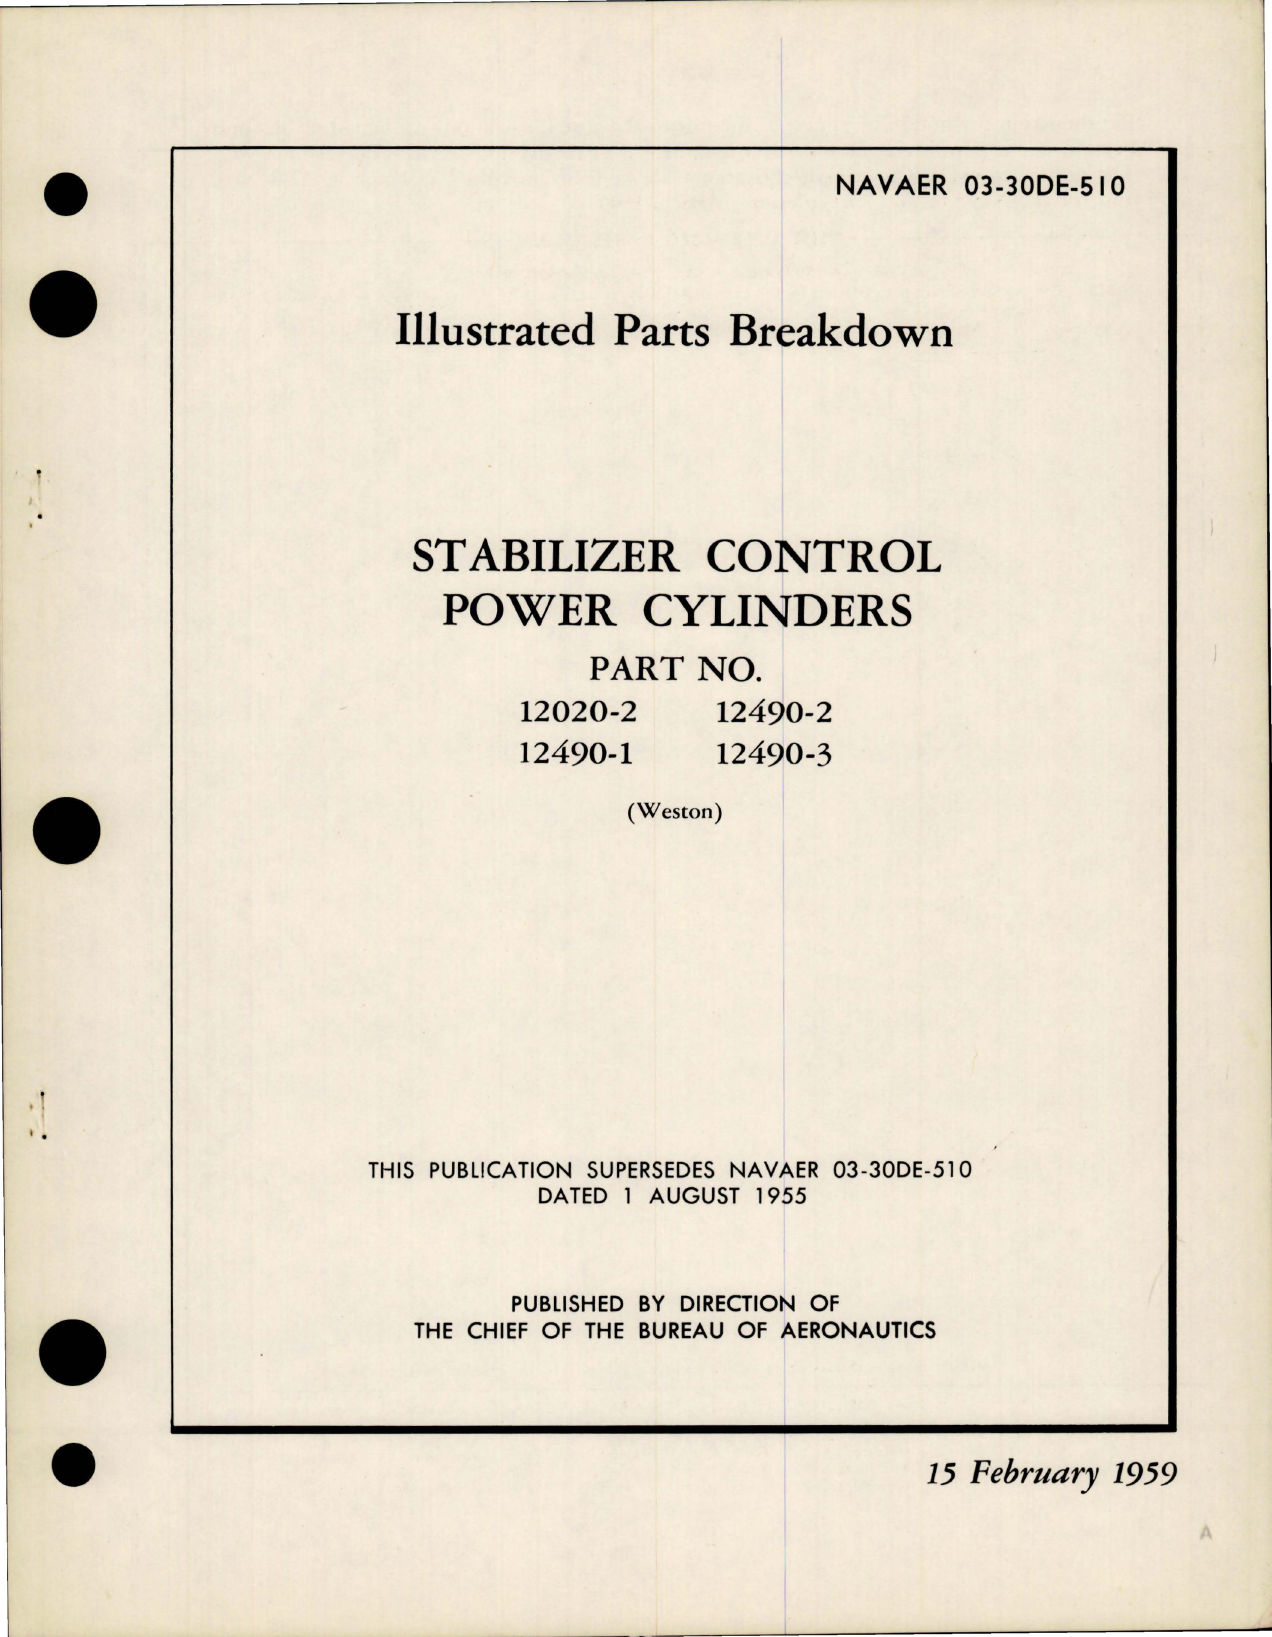 Sample page 1 from AirCorps Library document: Illustrated Parts Breakdown for Stabilizer Control Power Cylinders - Parts 12020-2, 12490-1, 12490-2, 12490-3 